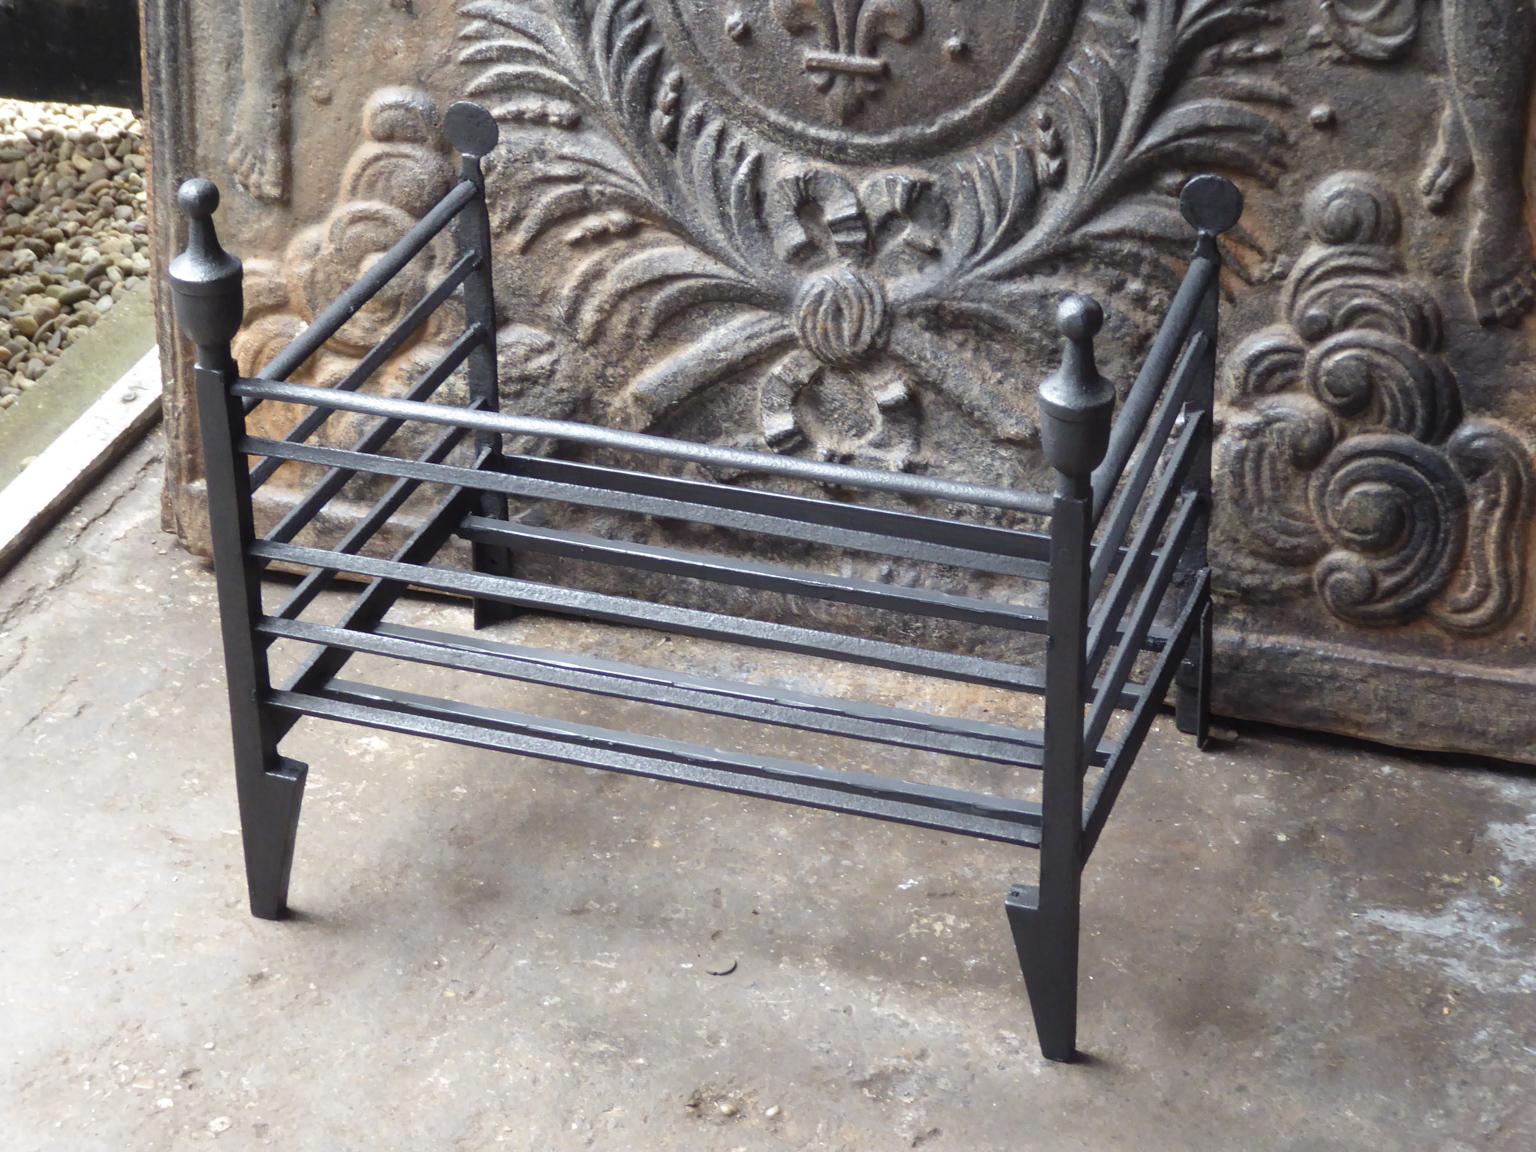 British 18th-19th Century English Georgian Fireplace Grate or Fire Grate